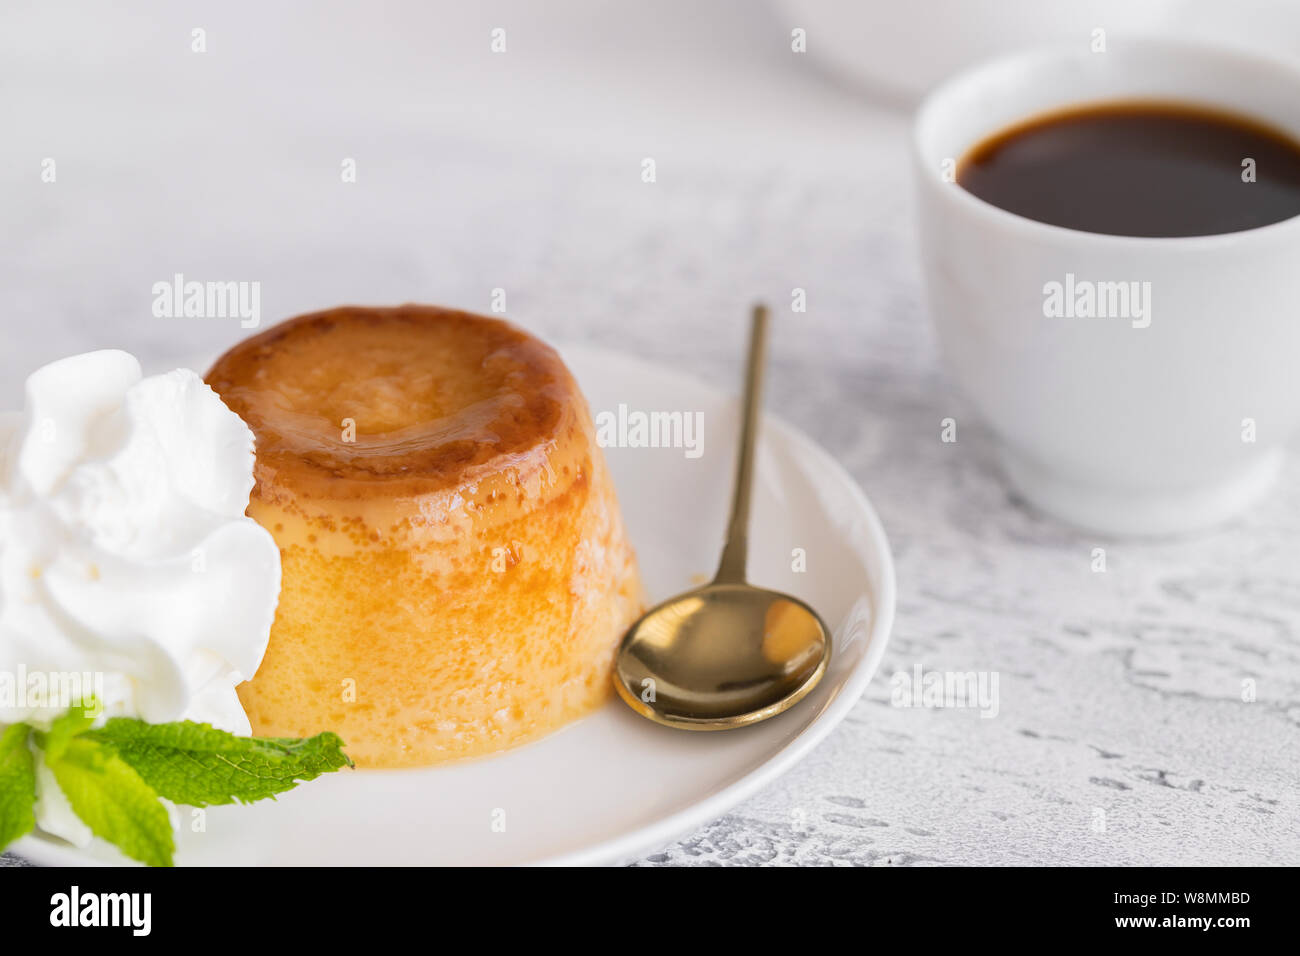 Pudding creme caramel hi-res Page Alamy and images stock - photography 19 